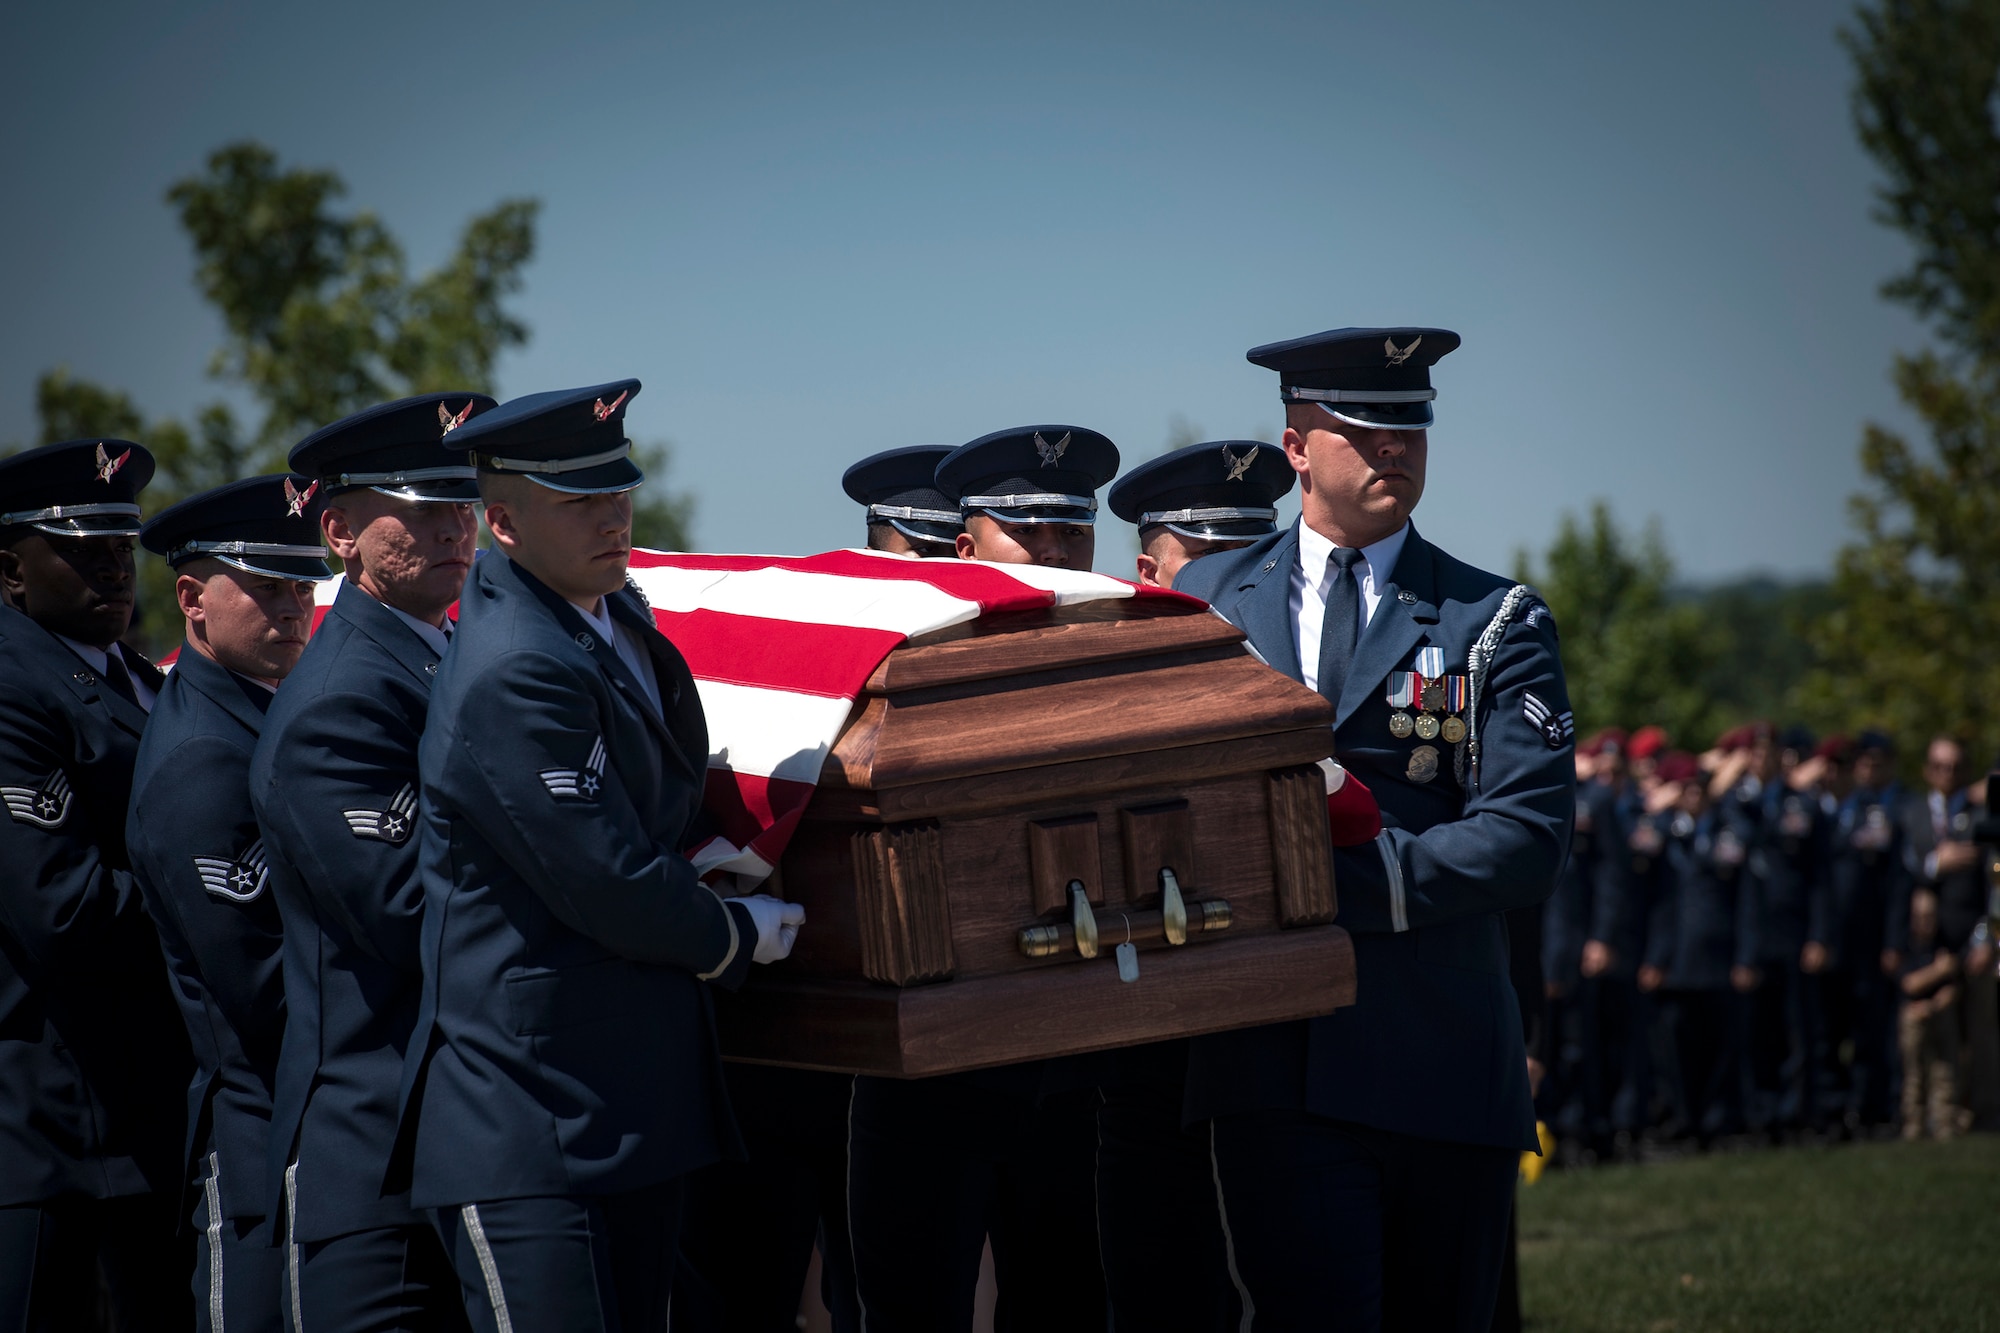 Members of the U.S. Air Force Honor Guard carry Capt. Mark Weber’s casket during his funeral service, July 9, 2018, at Arlington National Cemetery, Va. Weber, a 38th Rescue Squadron combat rescue officer and Texas native, was killed in an HH-60G Pave Hawk crash in Anbar Province, Iraq, March 15. Friends, family, and Guardian Angel Airmen traveled from across the U.S. to attend the ceremony and pay their final respects. (U.S. Air Force photo by Staff Sgt. Ryan Callaghan)